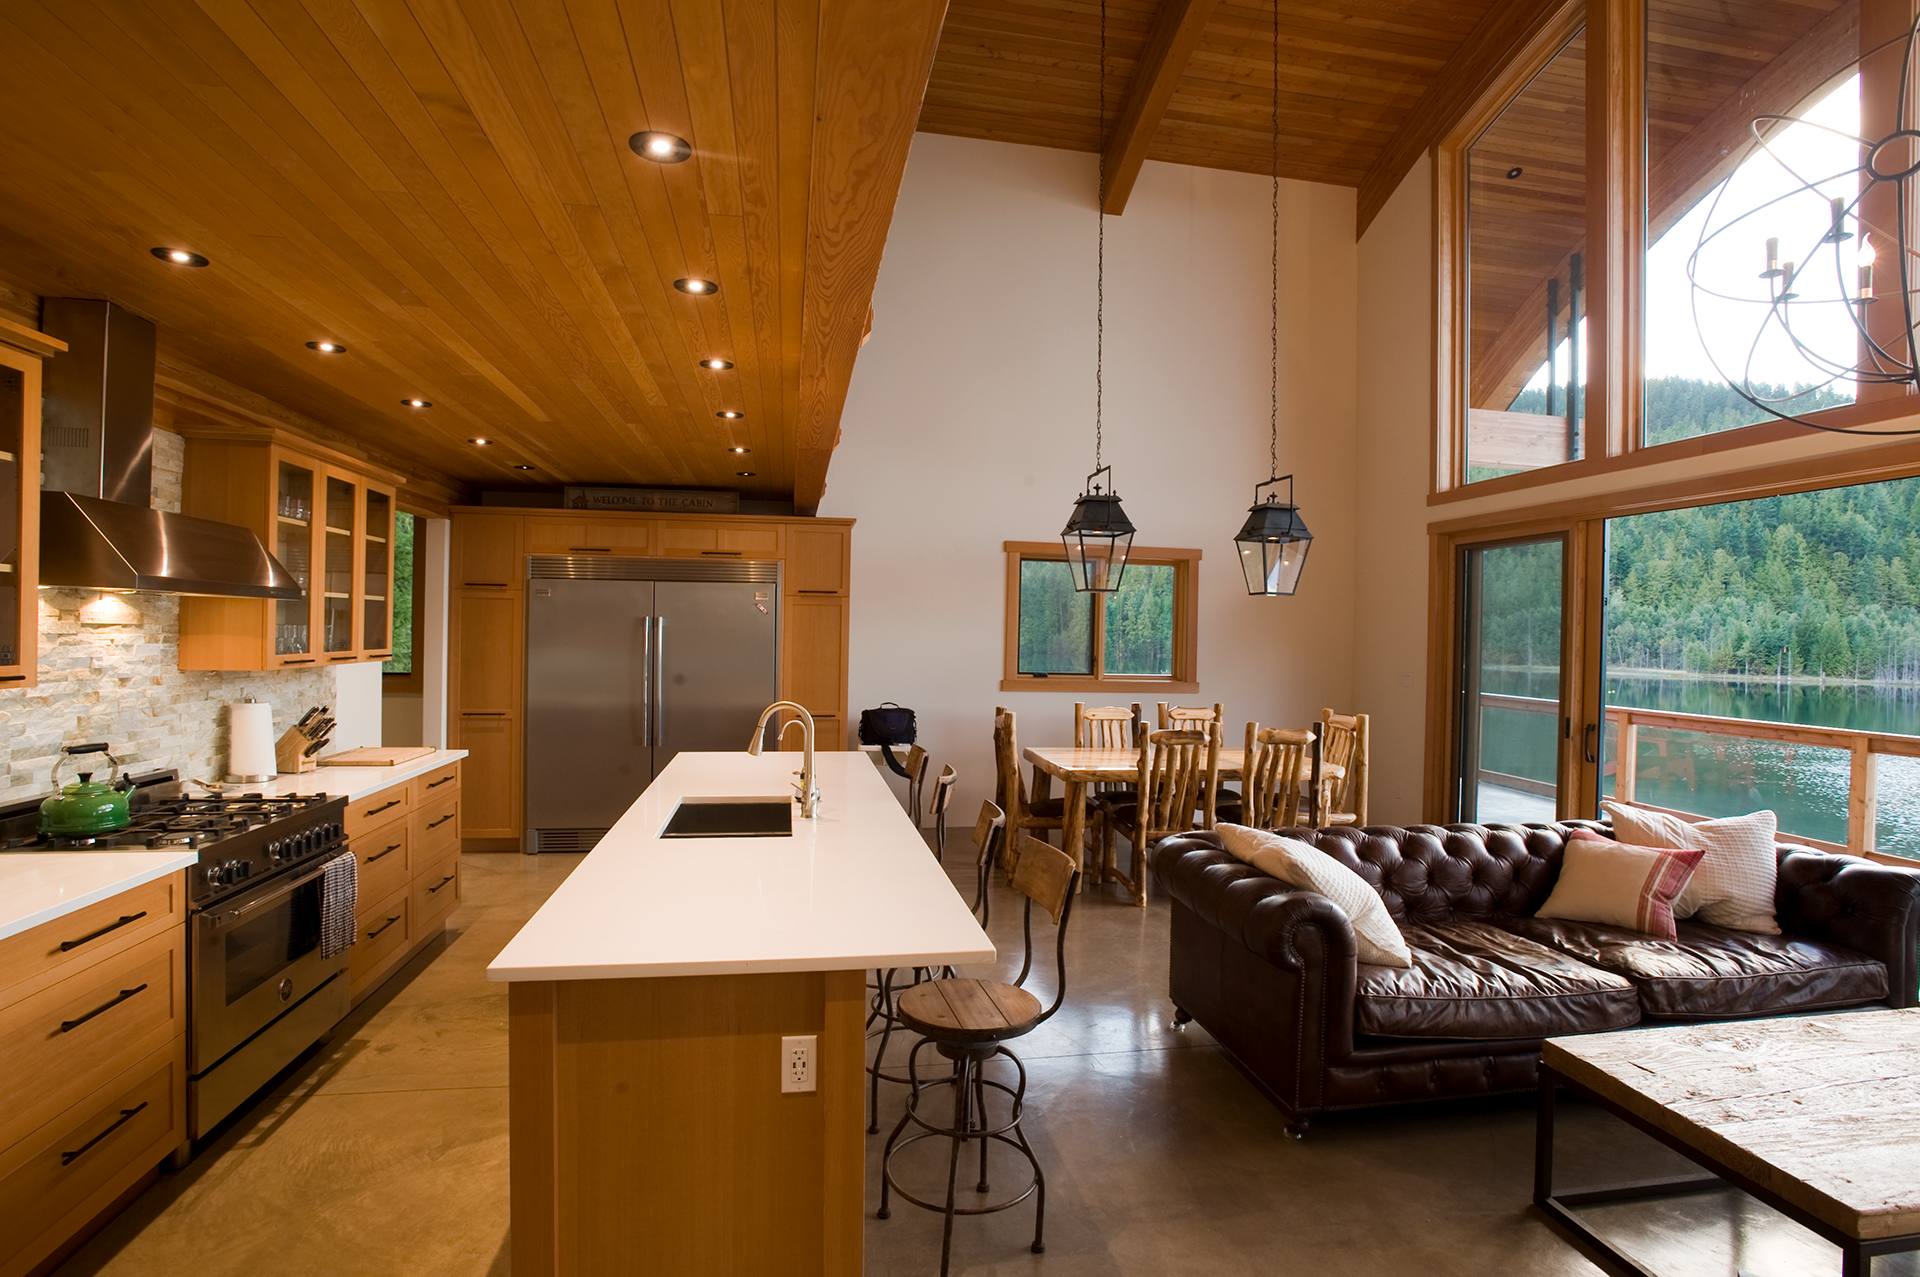 kitchen bar, dining, and living area with a view of the lake outside